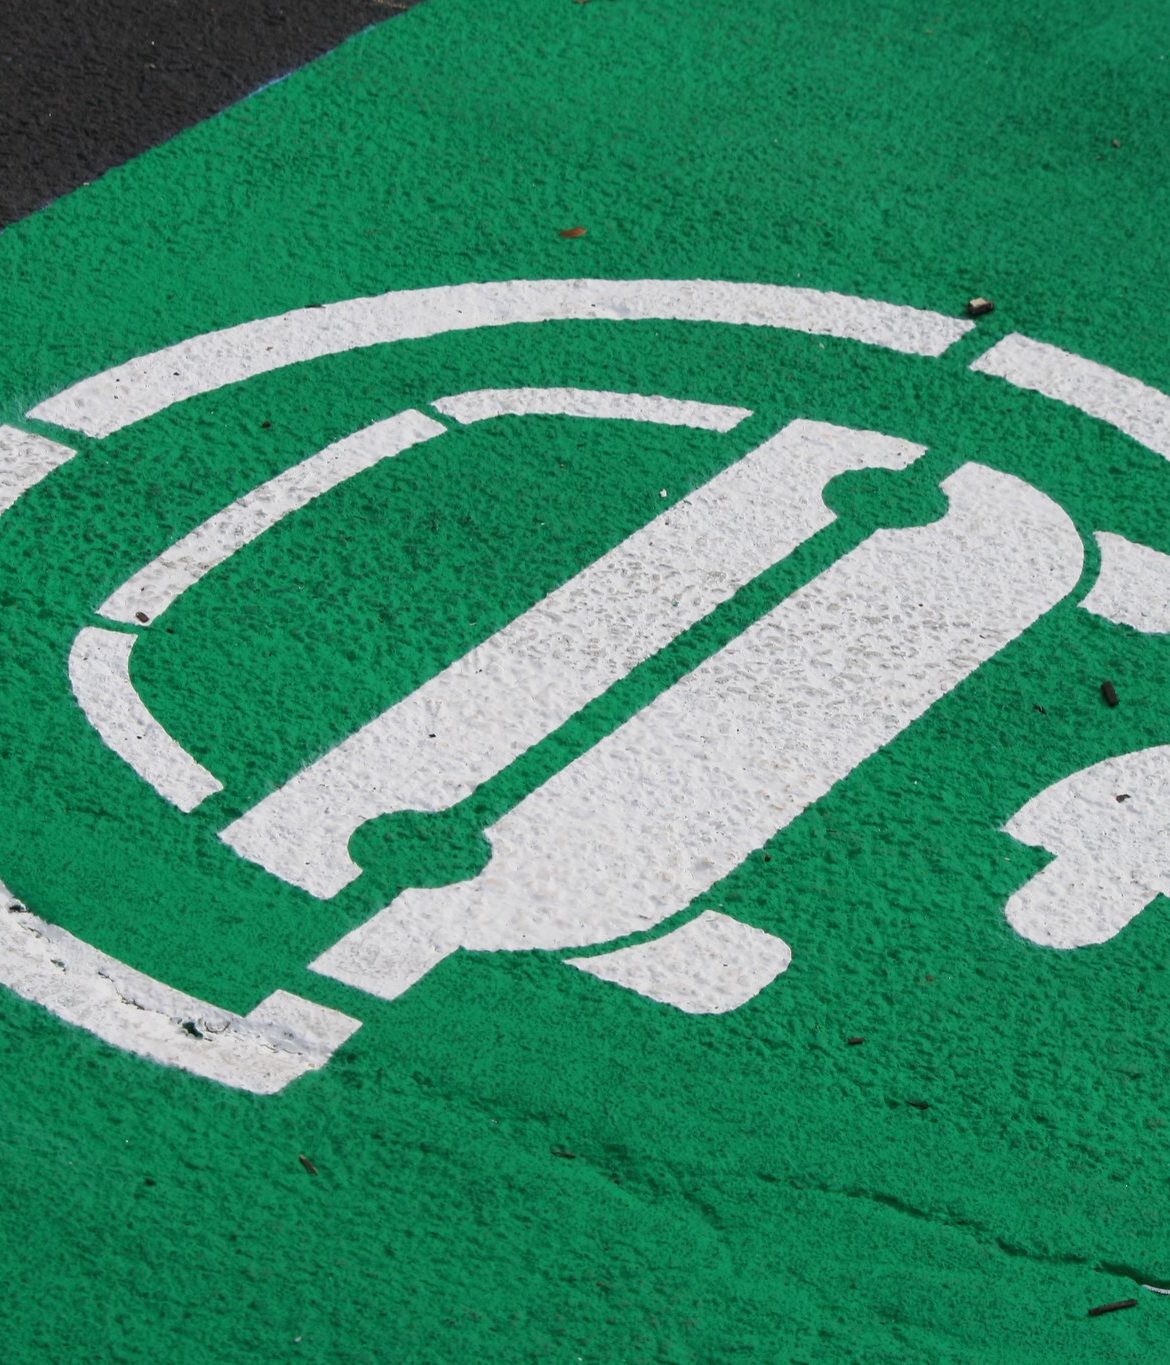 A parking space painted green with a symbol indicating the space is dedicated for EVs